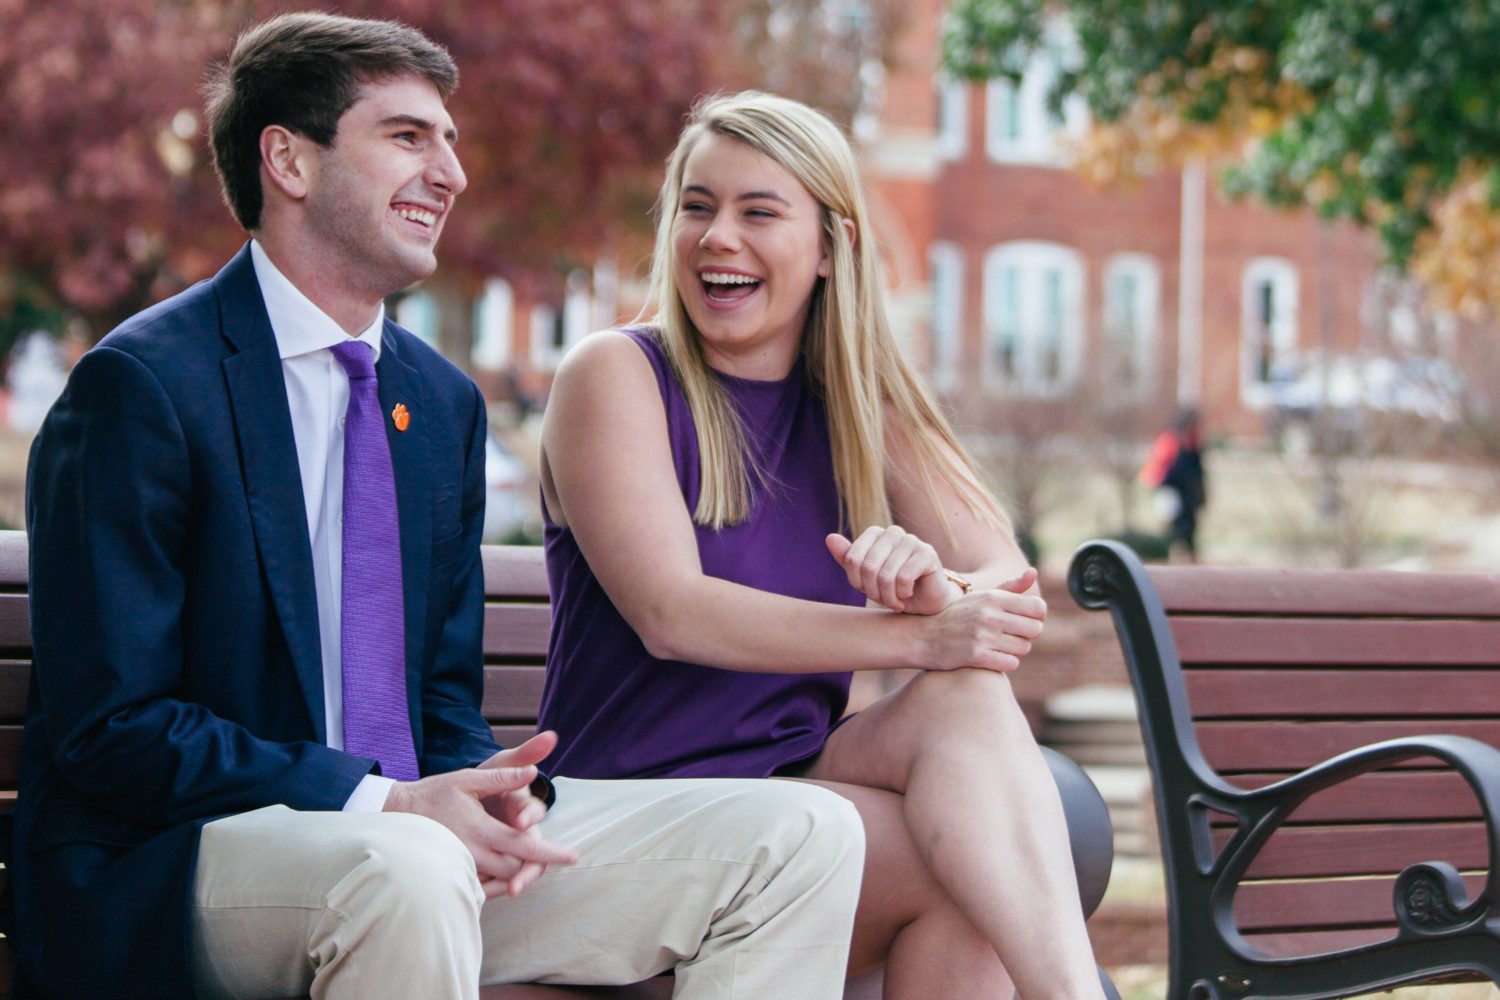 Andrew Kwasny (left) and Logan Young (right) were elected student body vice president and president, respectively, in Clemson University's 2019 election.